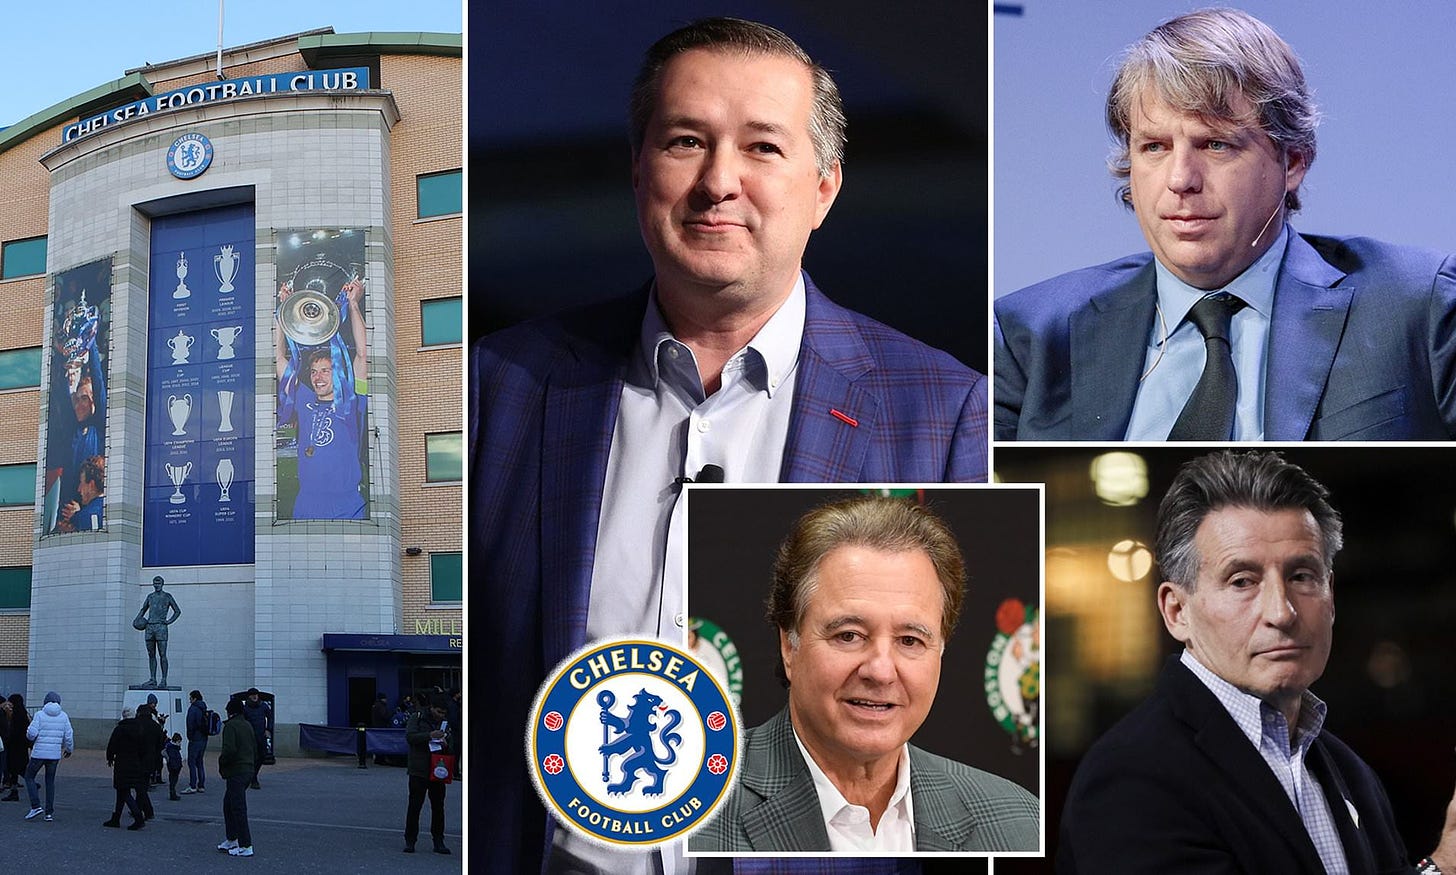 Boston Celtics owner Stephen Pagliuca joins the £3bn race to buy Chelsea as  he makes the shortlist | Daily Mail Online